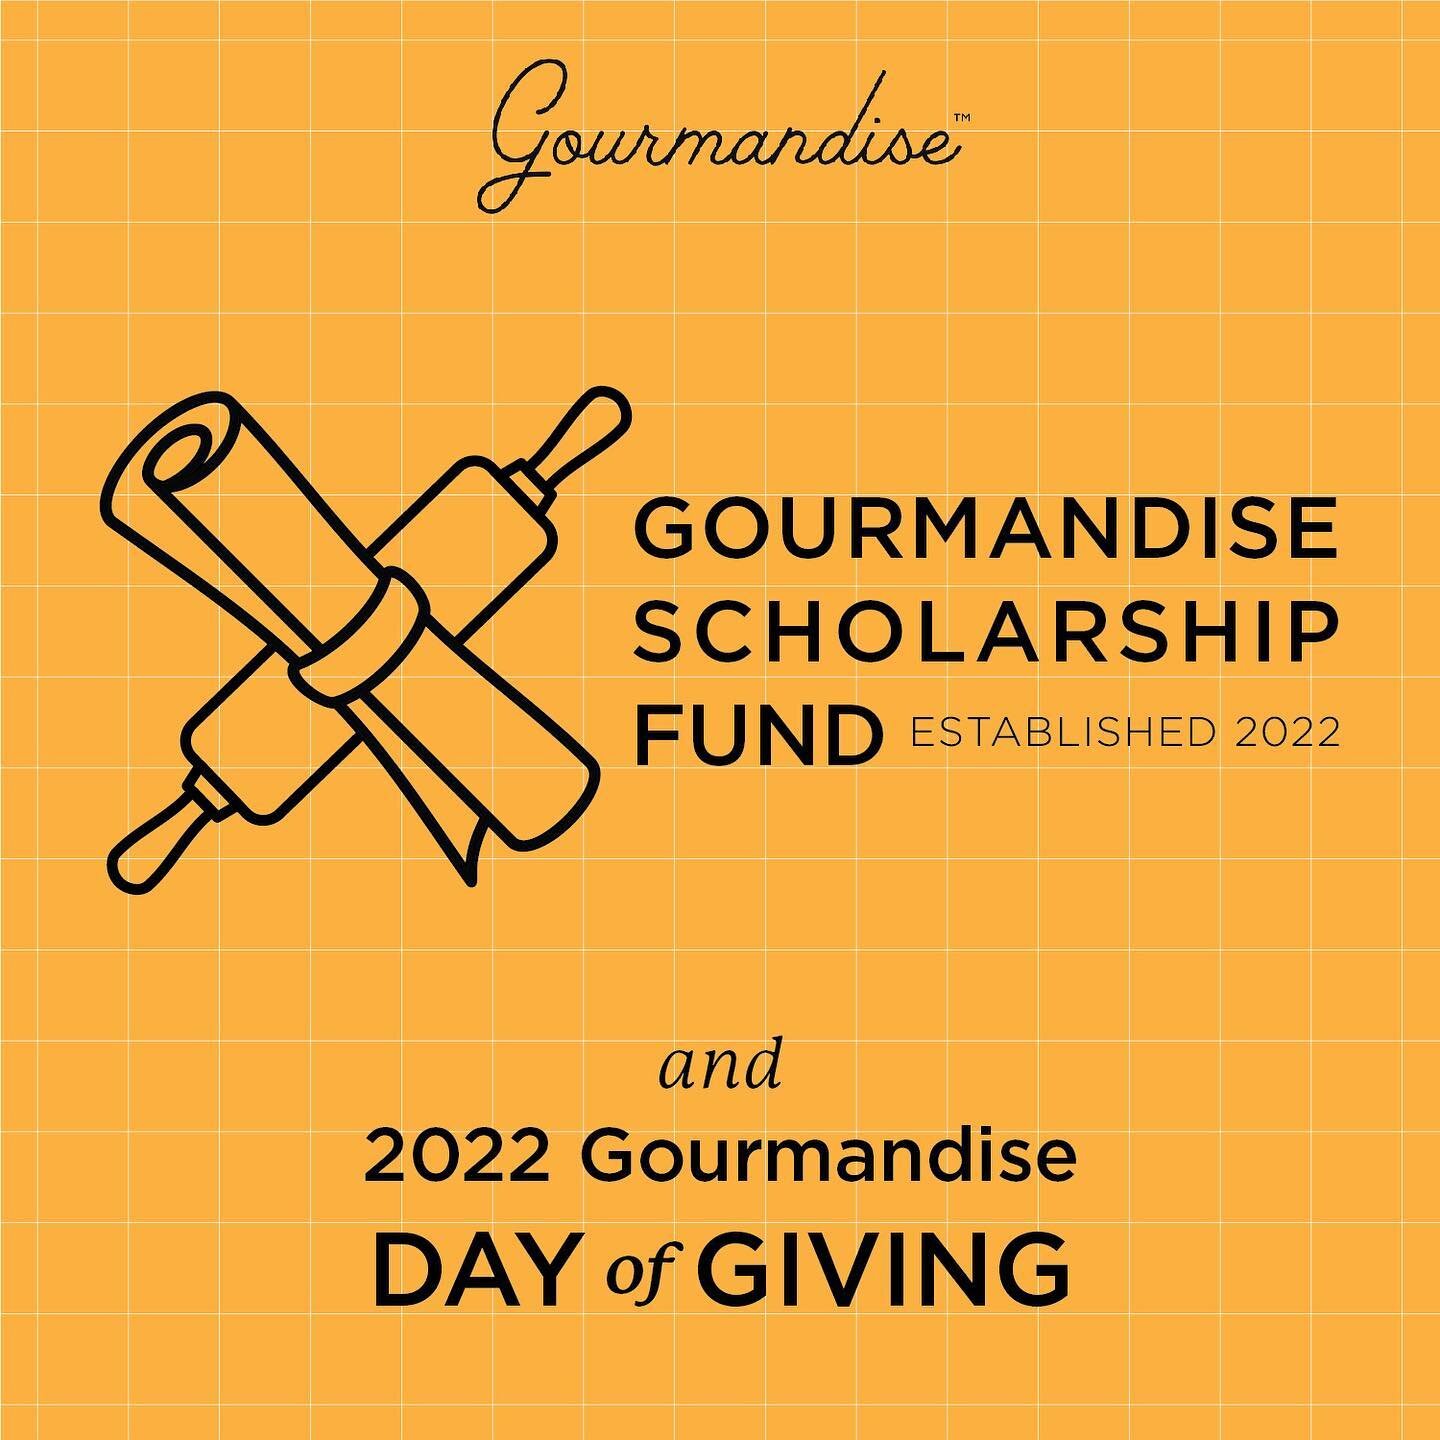 It&rsquo;s long, but we think you&rsquo;re going to want to read this.&nbsp;
Friends, we could not be more excited to unveil to you our newest, near-and-dear-to-hearts endeavor. We are thrilled to announce the creation of the Gourmandise Scholarship 